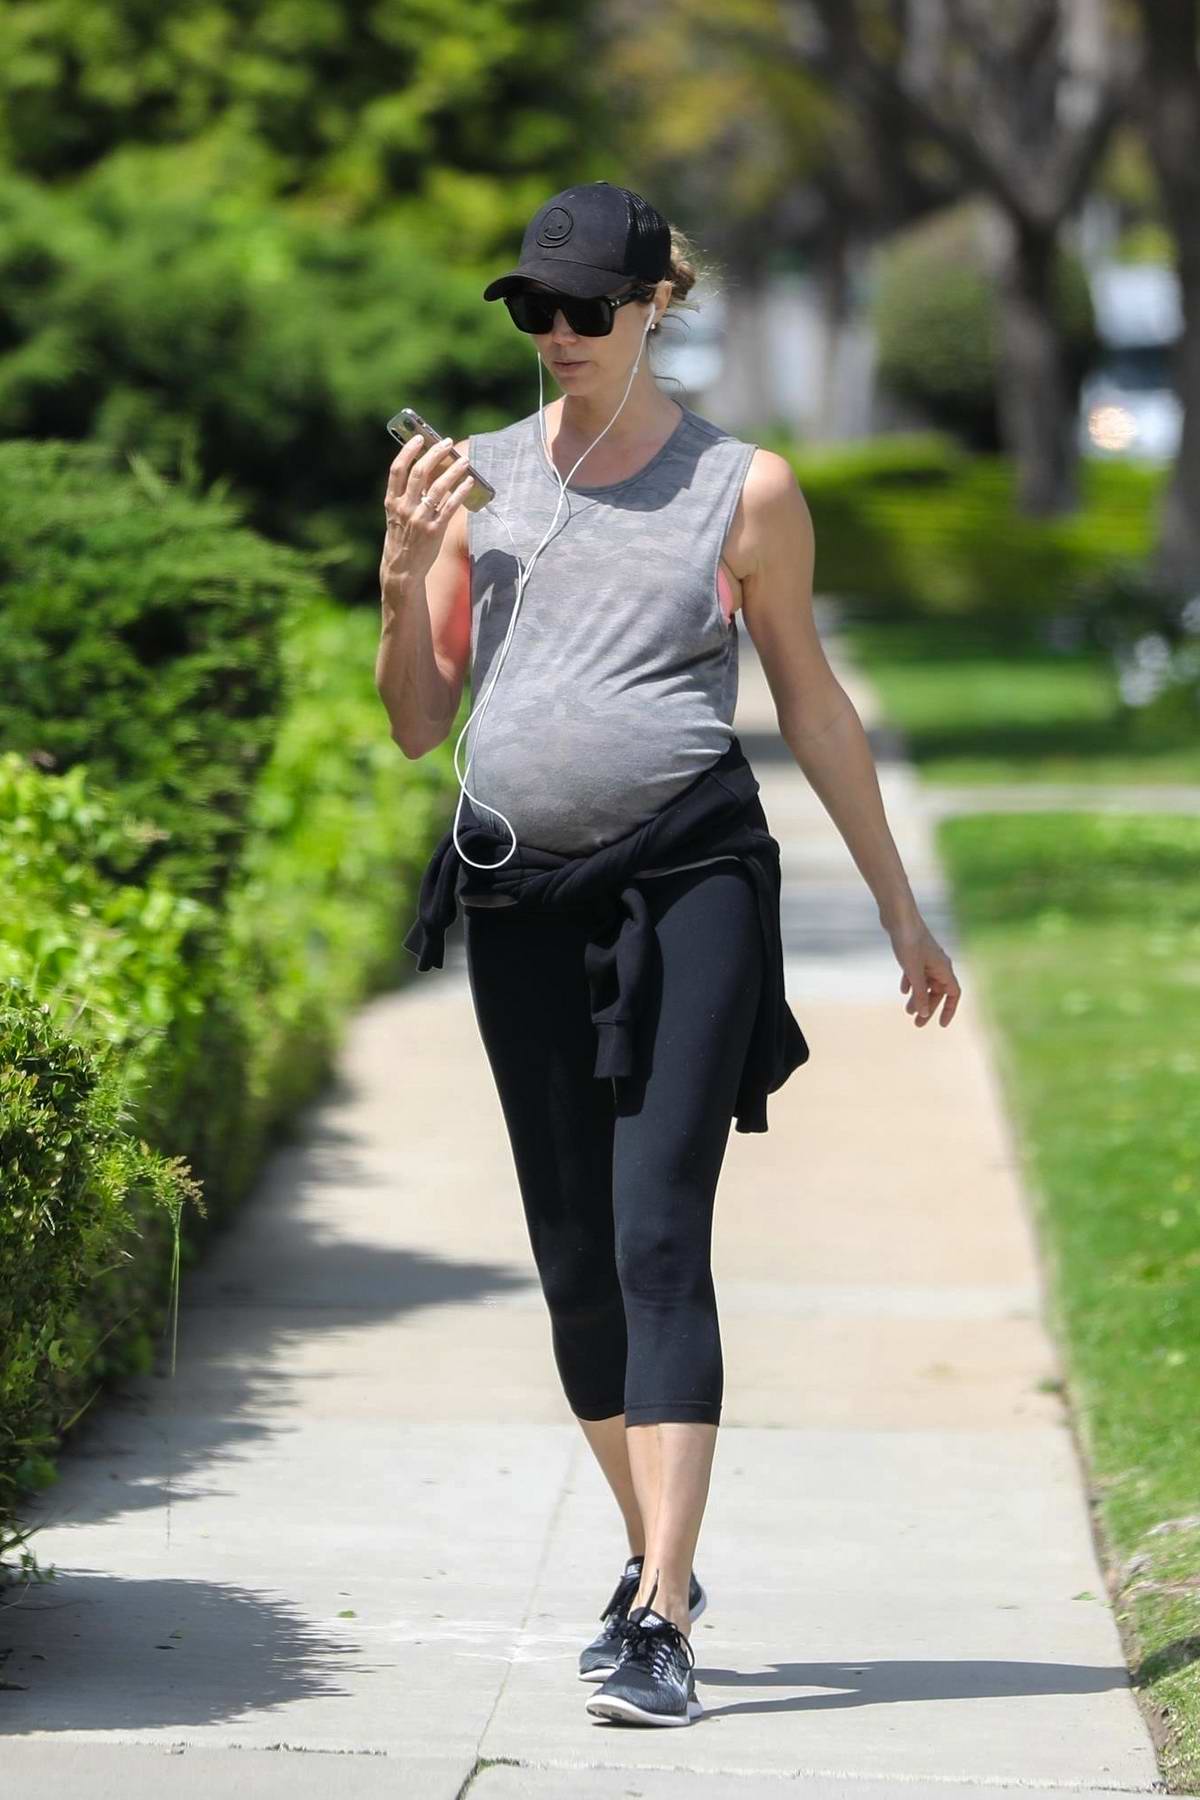 stacy keibler shows off her baby bump as she steps out for a walk